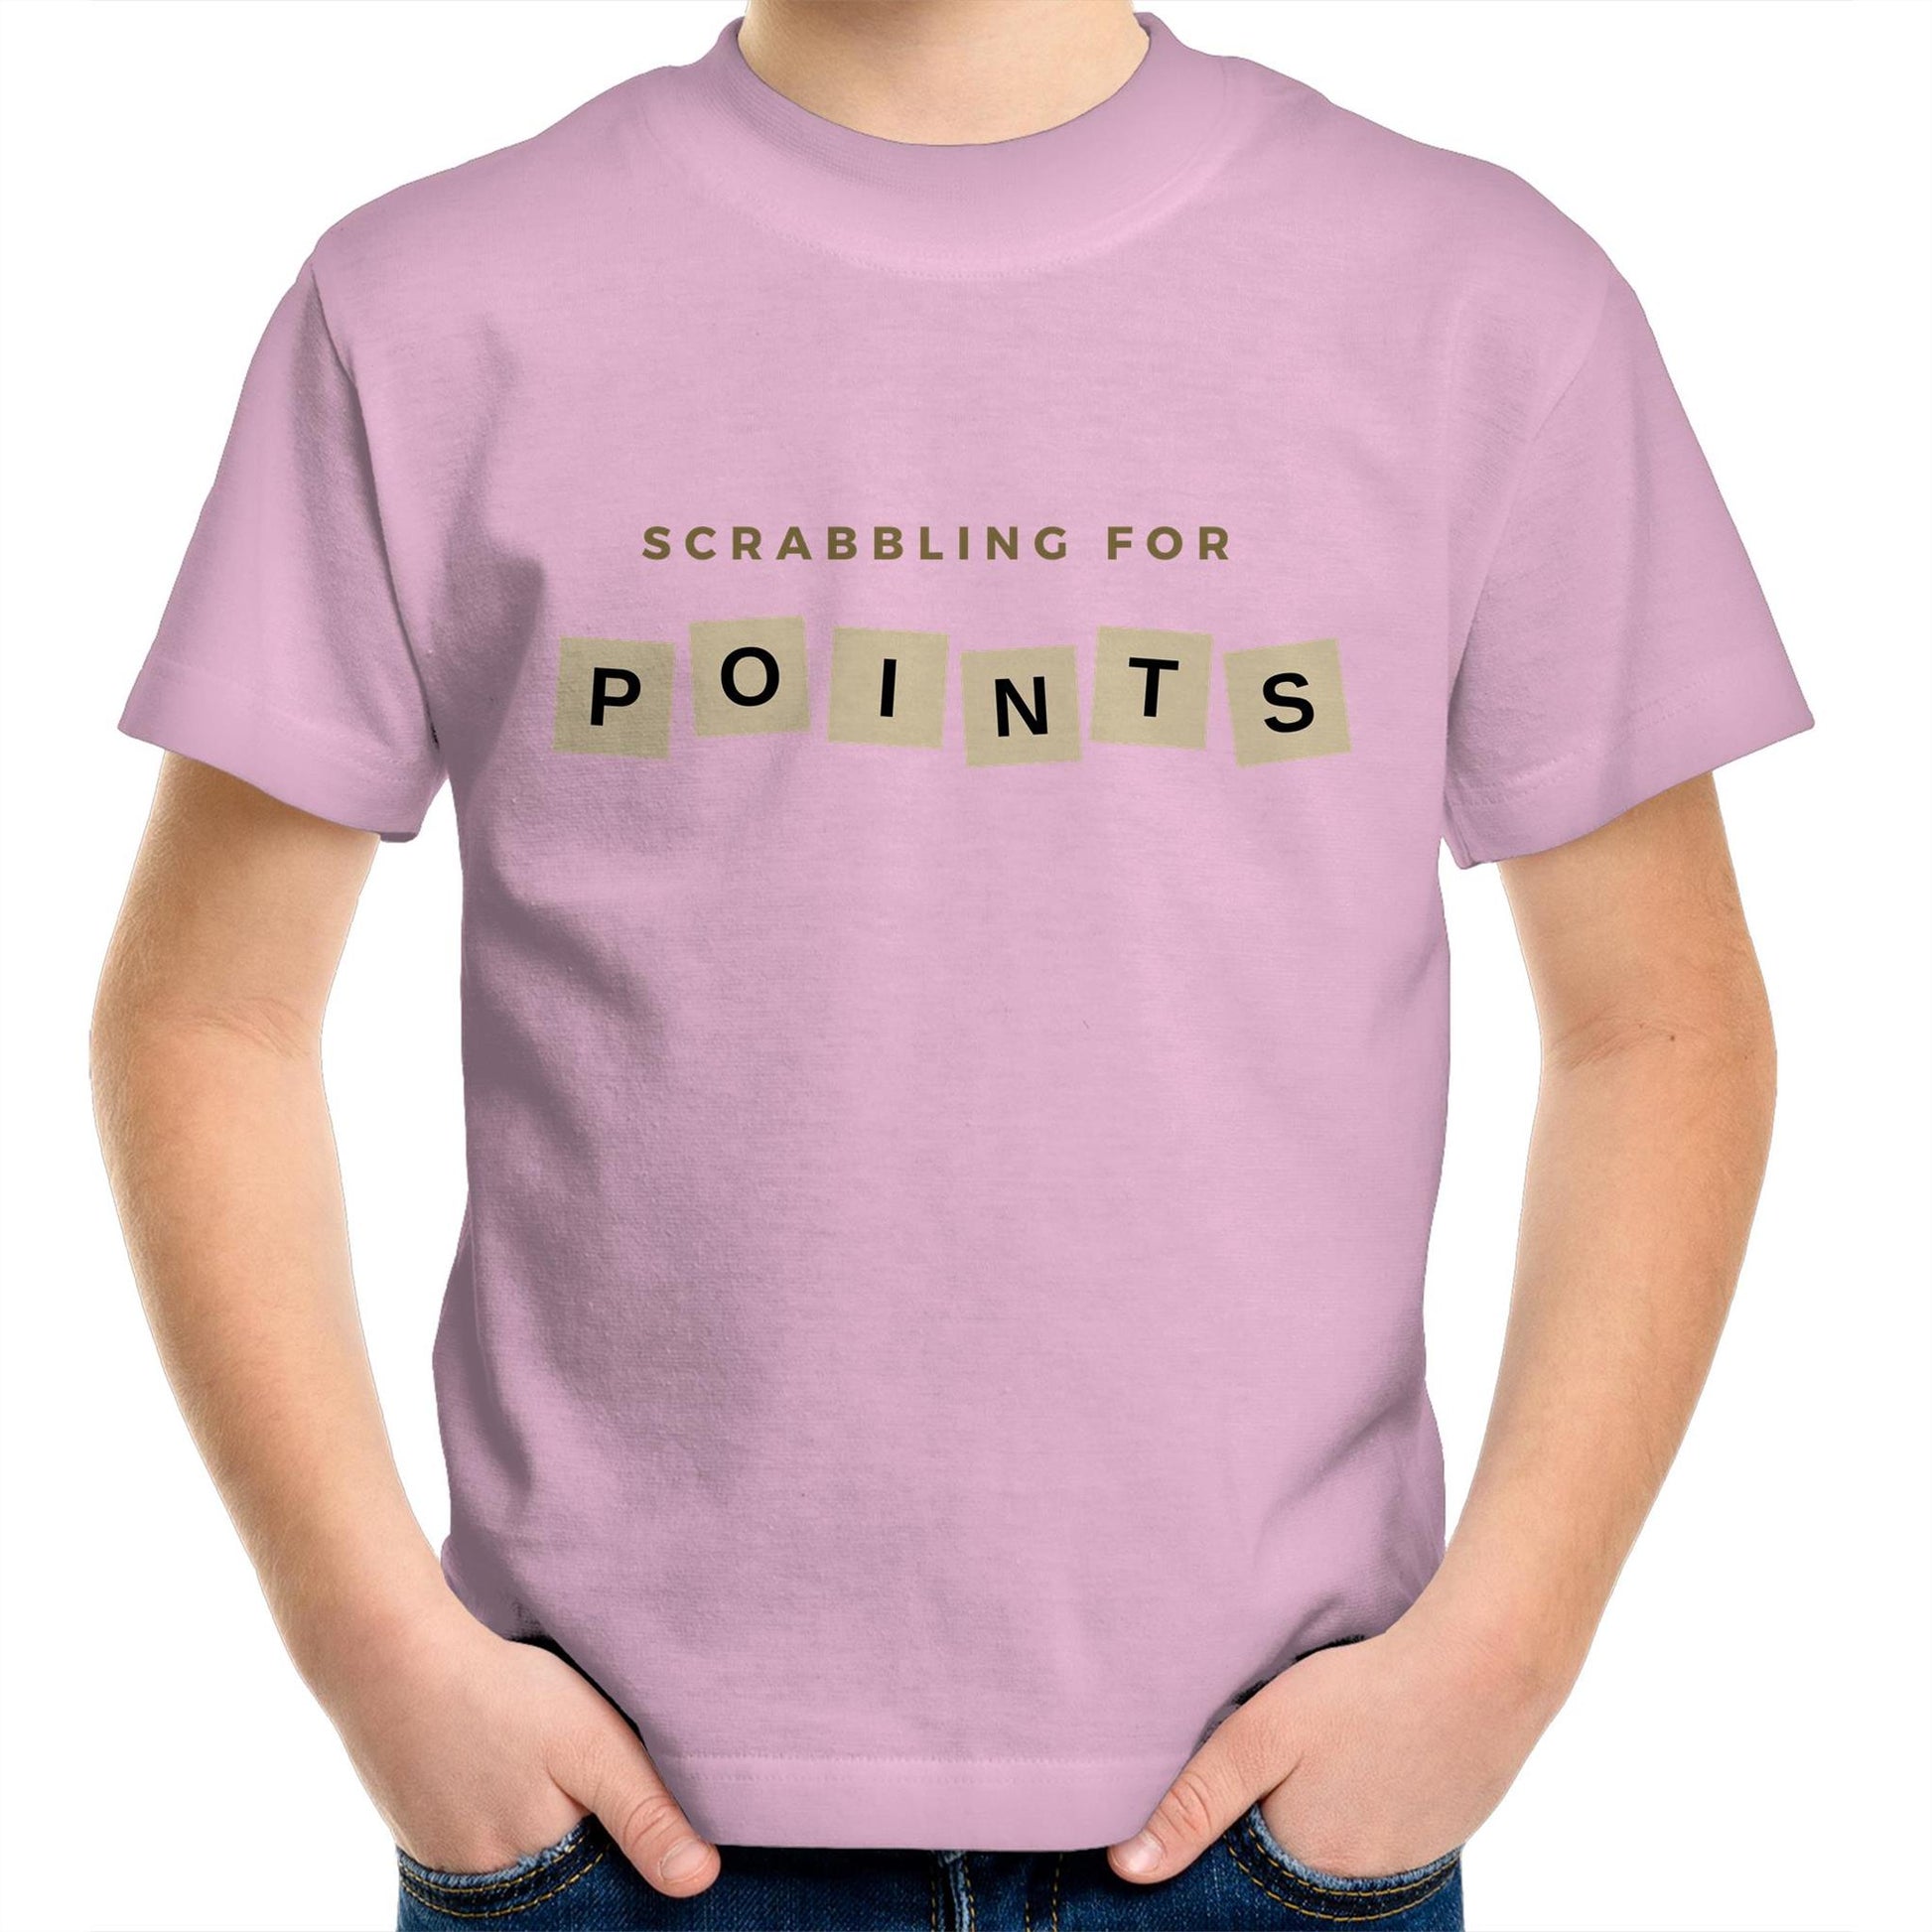 Scrabbling For Points - Kids Youth Crew T-Shirt Pink Kids Youth T-shirt Games